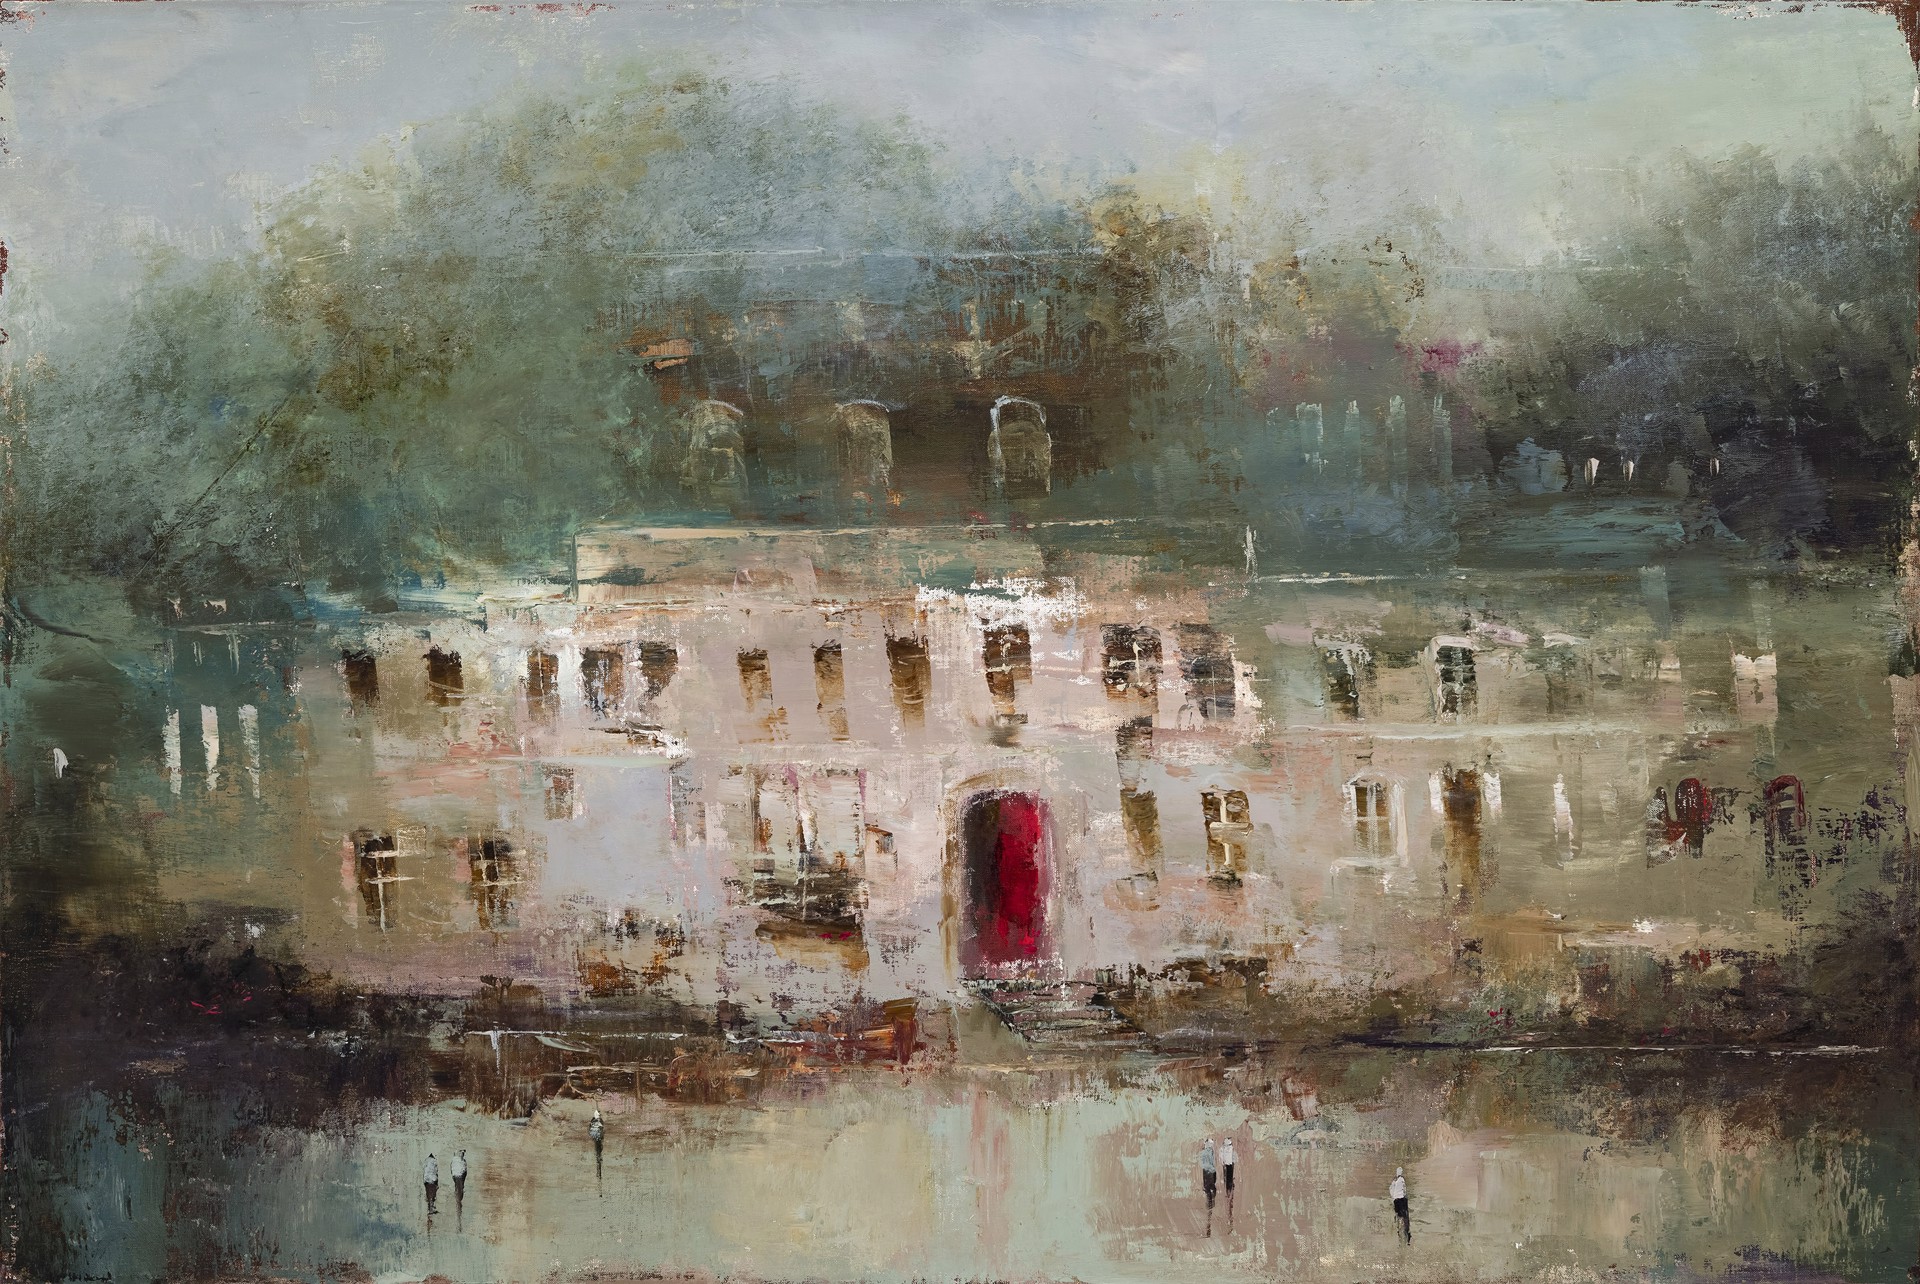 To See the Summer Sky is Poetry by France Jodoin